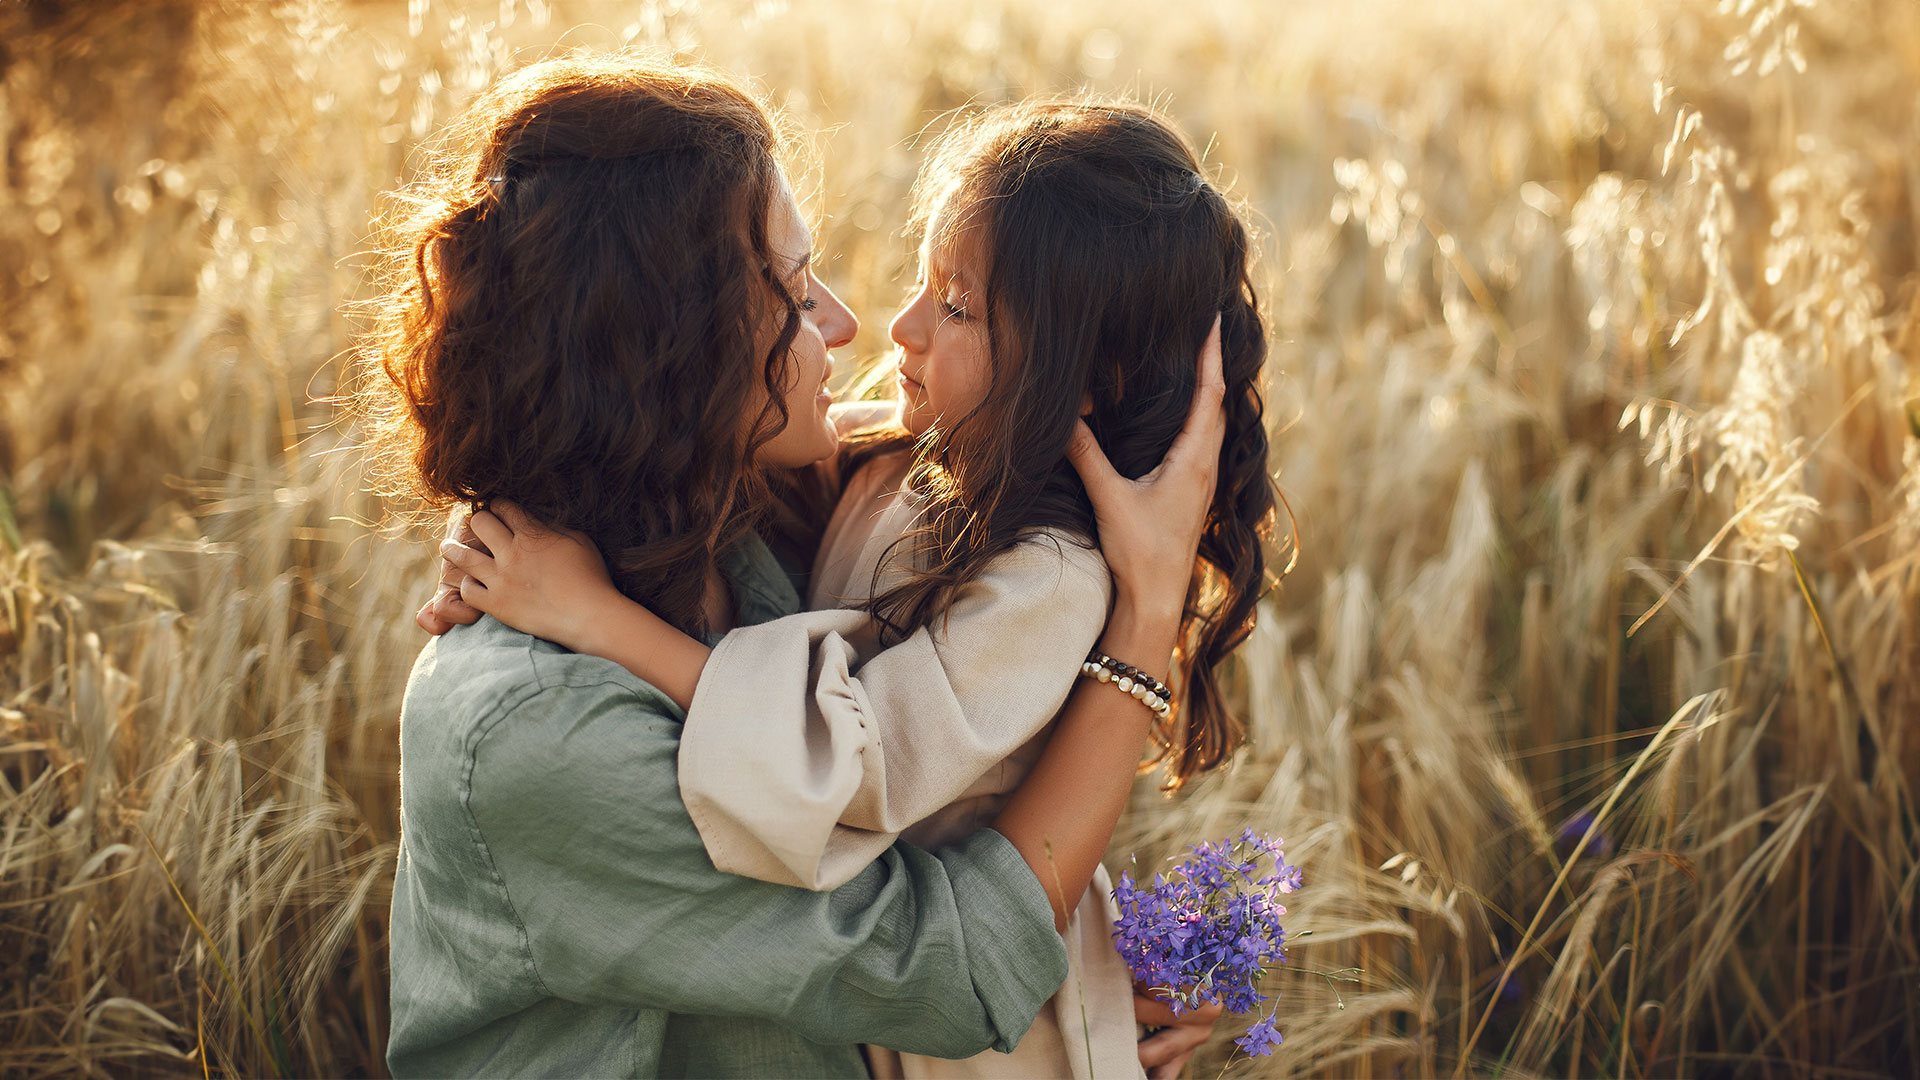 Unconditional Love: The Eternal Bond between Mothers and Daughters